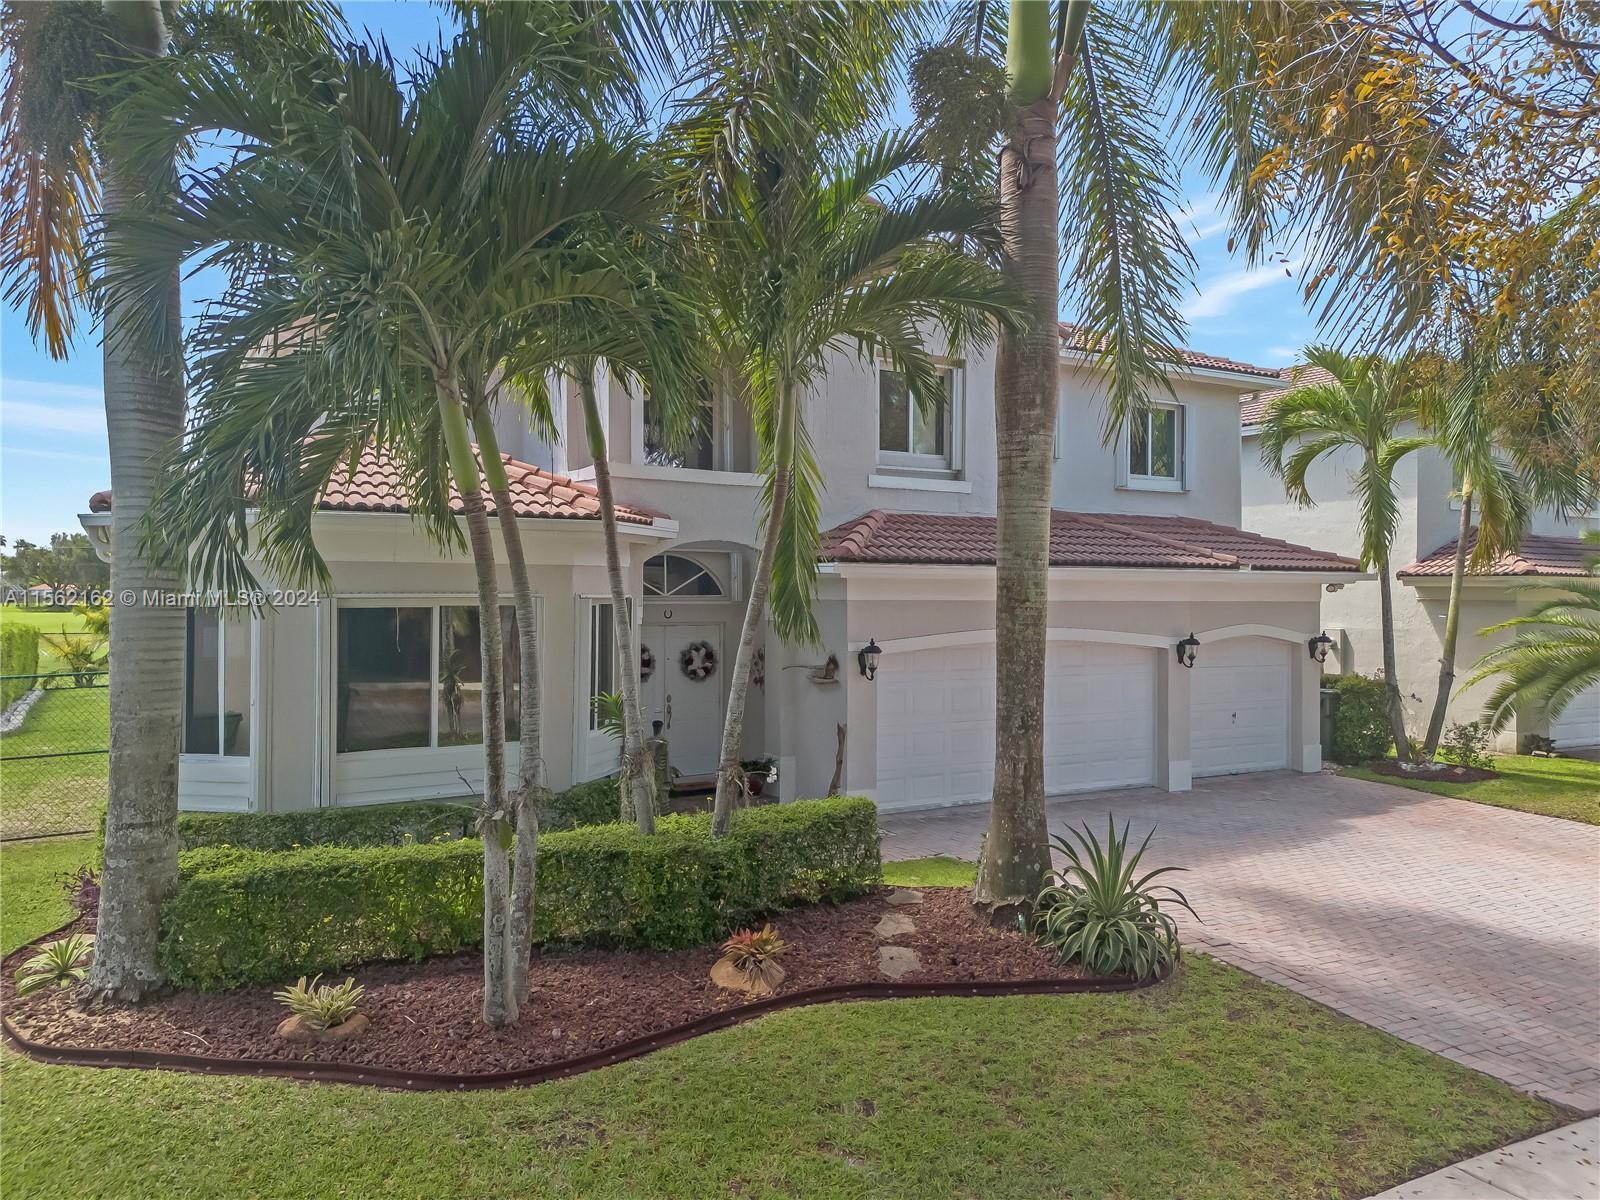 Photo of 1990 SE 23rd Ct in Homestead, FL